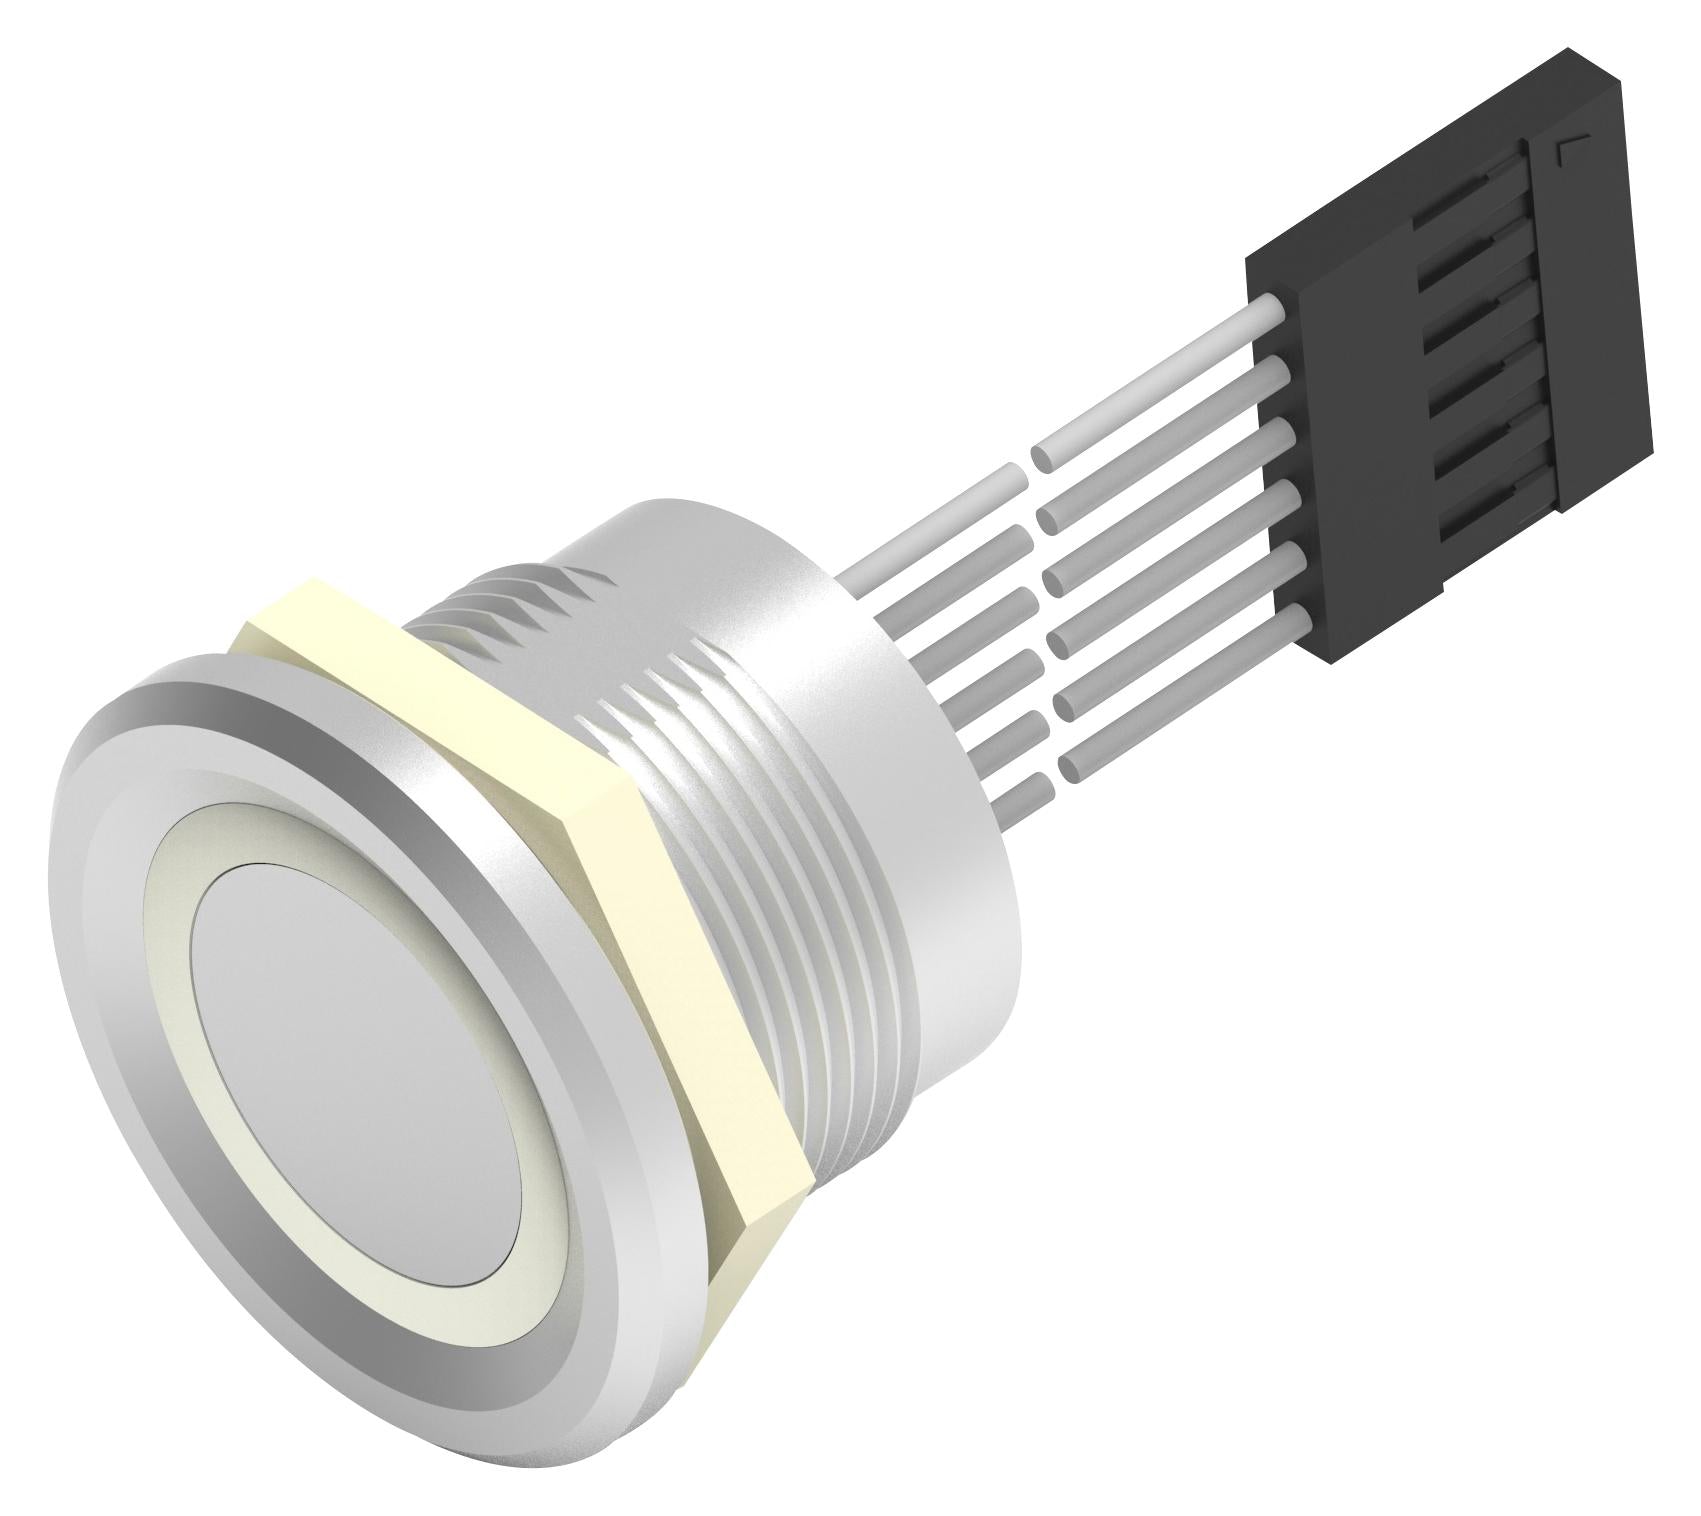 AVP22MAIOCE0DT5A04 VANDAL RESISTANT SW, SPST, 1A, 24V, PANL ALCOSWITCH - TE CONNECTIVITY